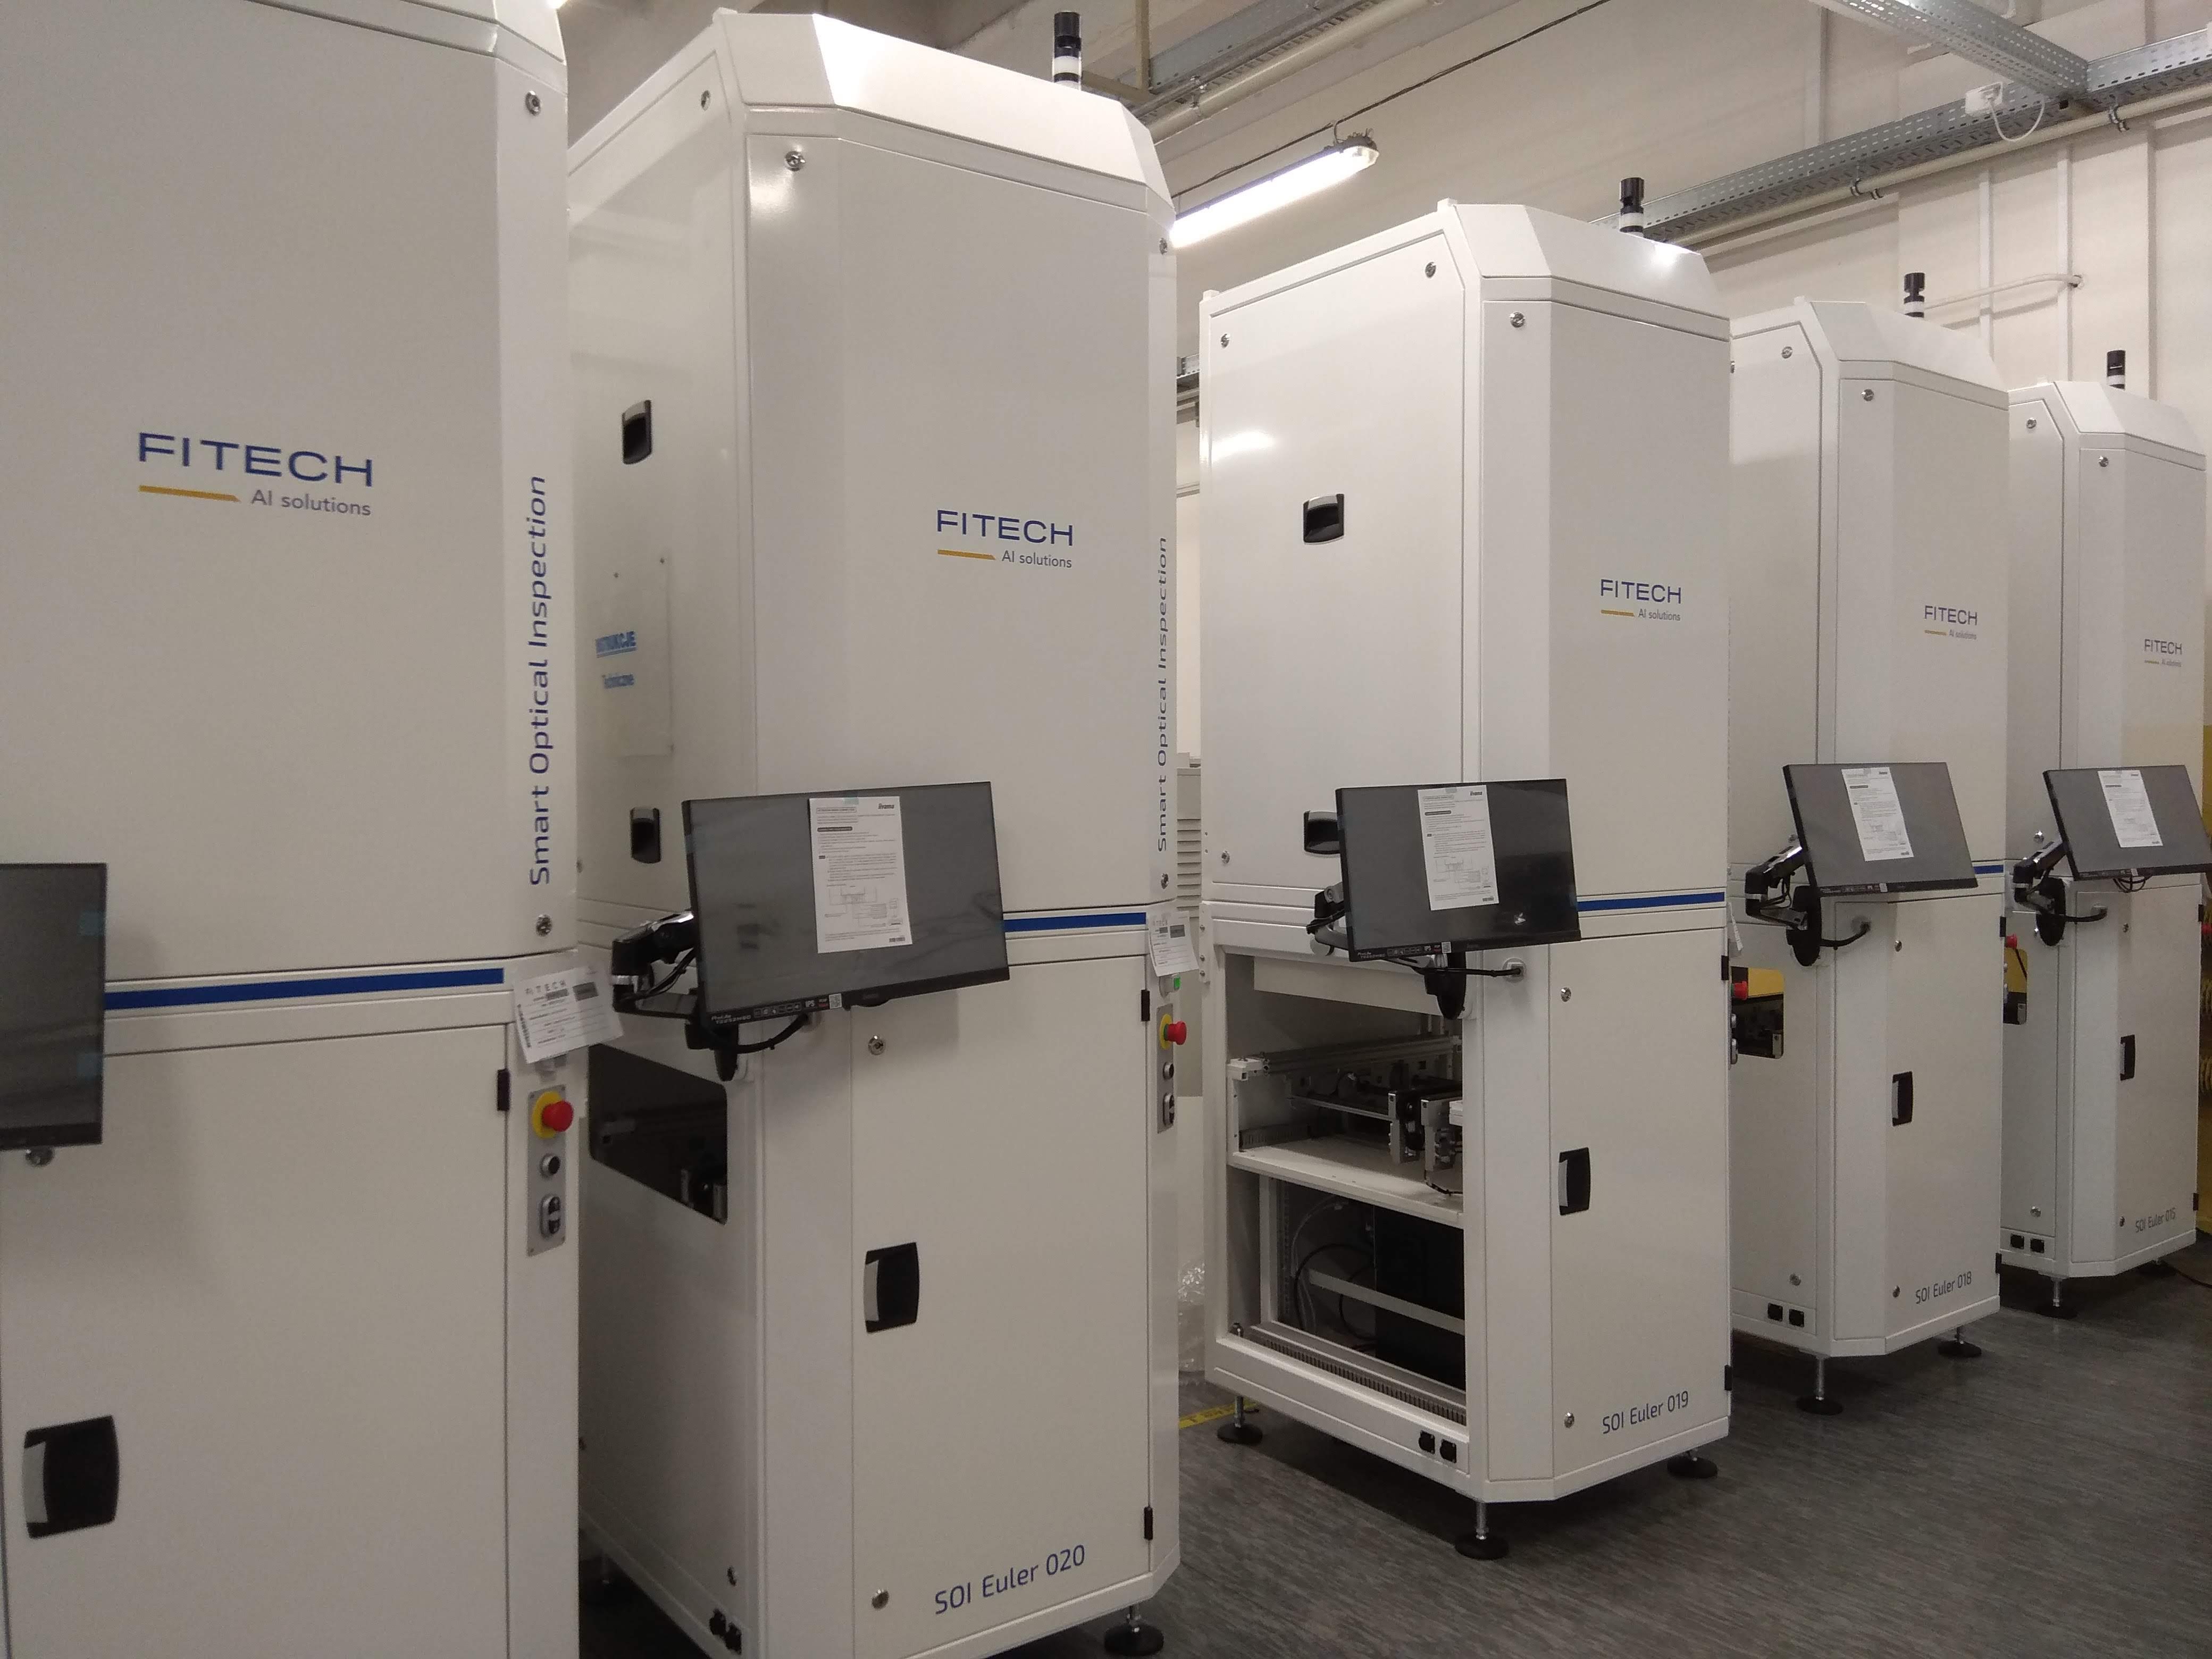 Five ready-made devices, equipped with cuboid monitors in a white housing, stand next to each other in one factory room. On the front, a blue inscription: FITECH AI solutions. Perpendicular to it, the inscription on the side of each device: Smart Optical Inspection. At the bottom of the machines, an inscription: SOI Euler 020.